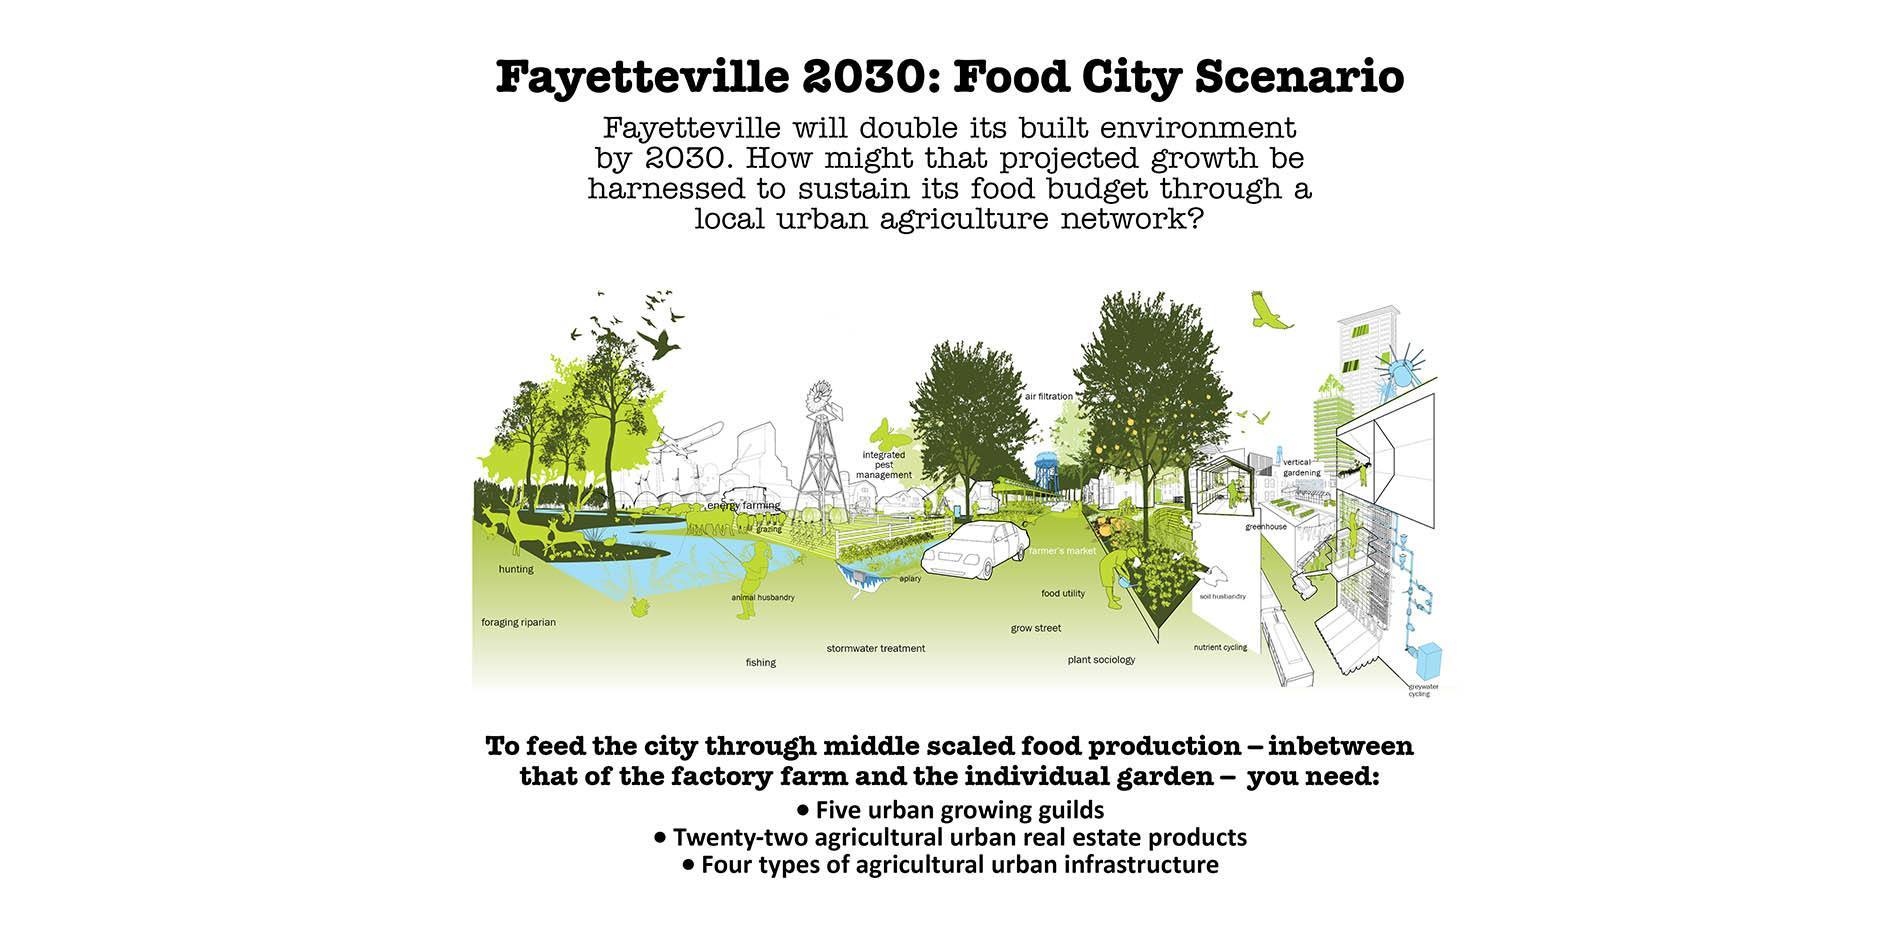 Fayetteville will double its built environment by 2030